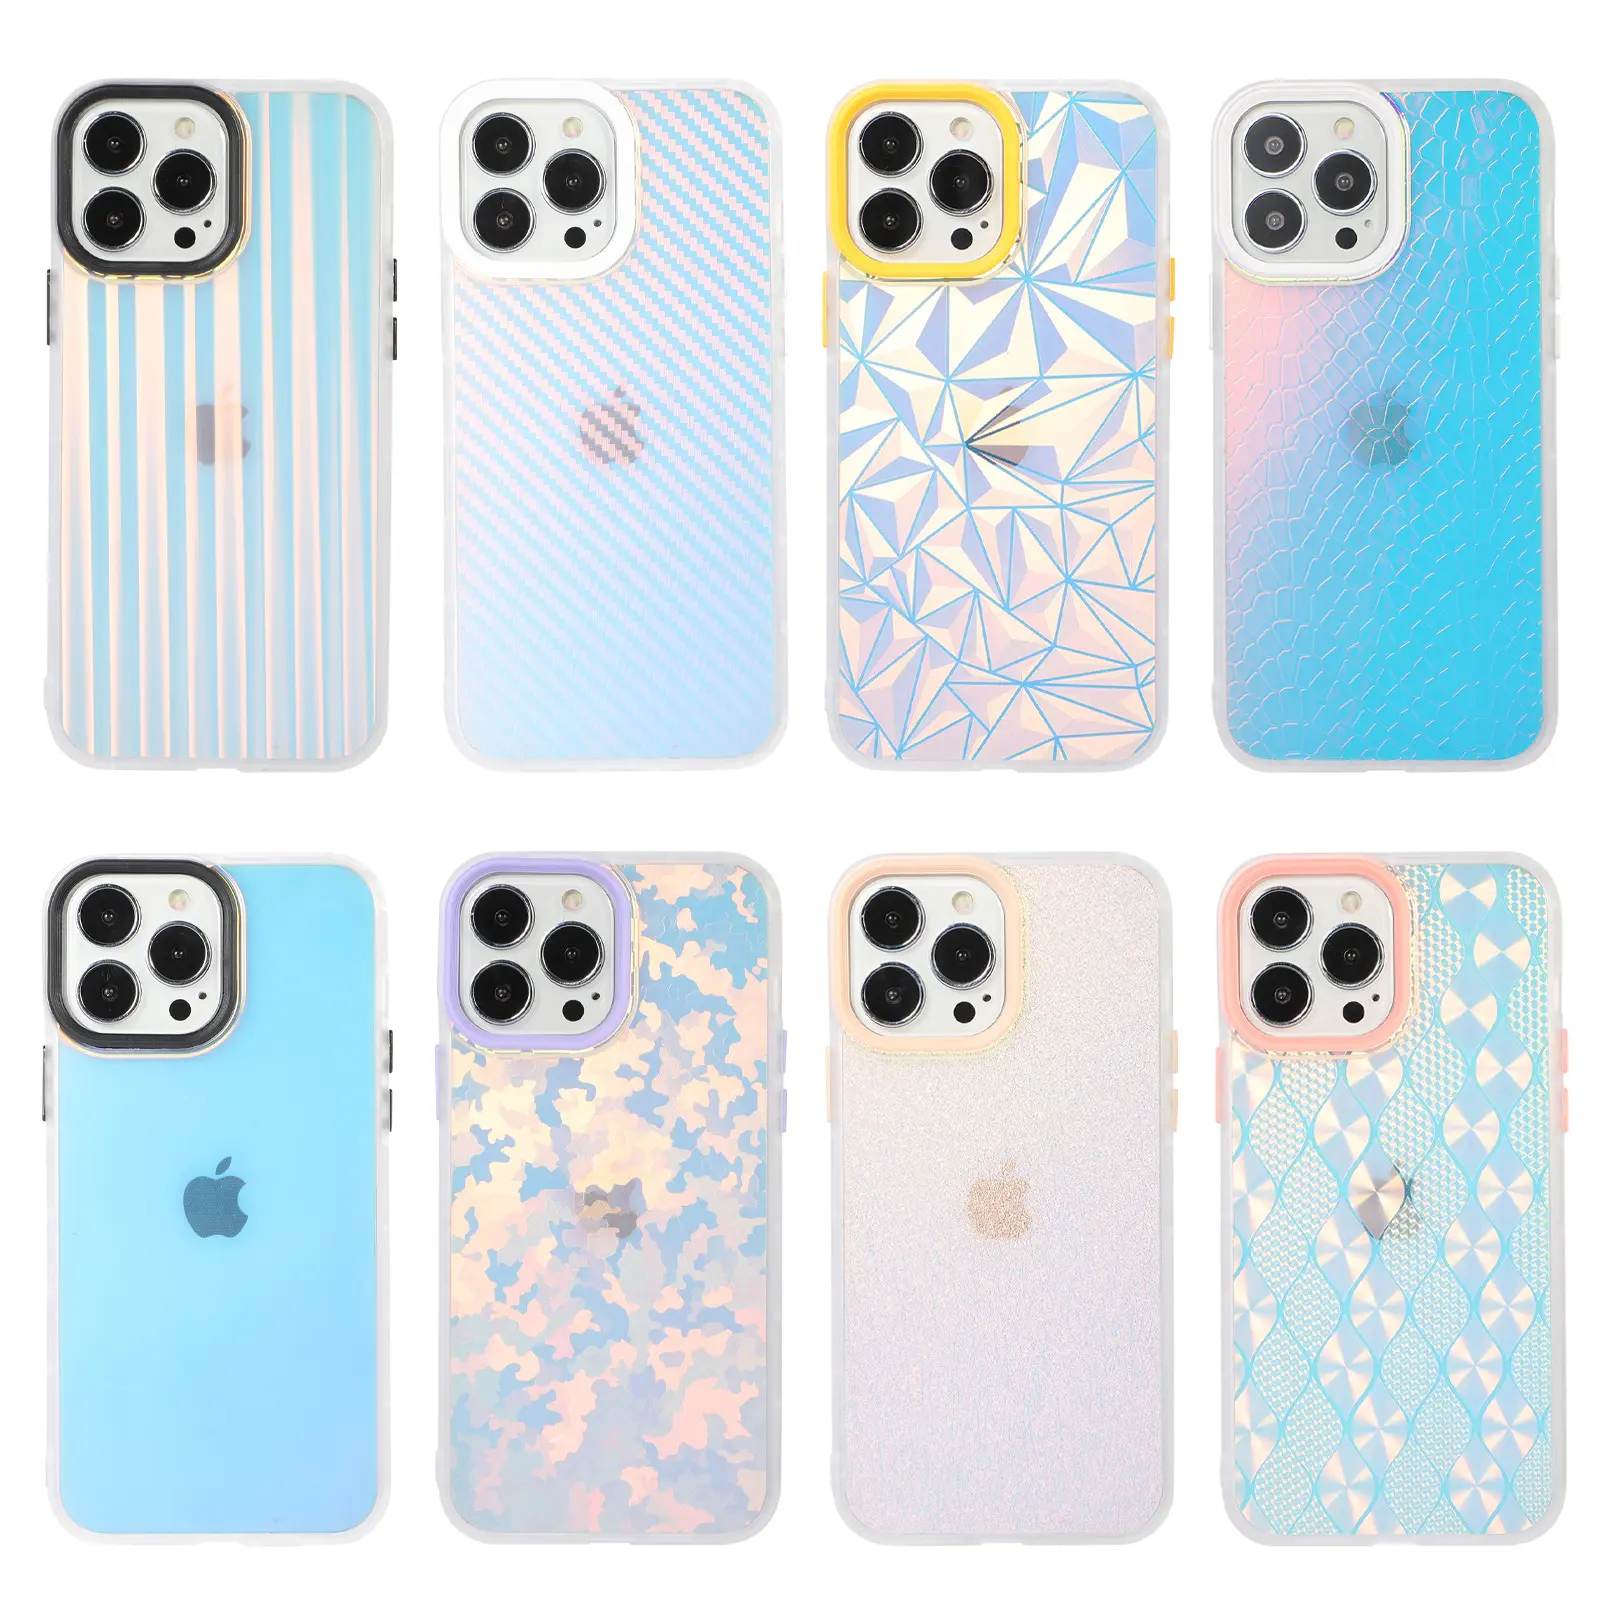 New Case for iPhone 13 Pro Max Case 2022 Magic New Technology for iPhone 13 13Pro 12 12Pro 11 11Pro Max Mini XS XR X